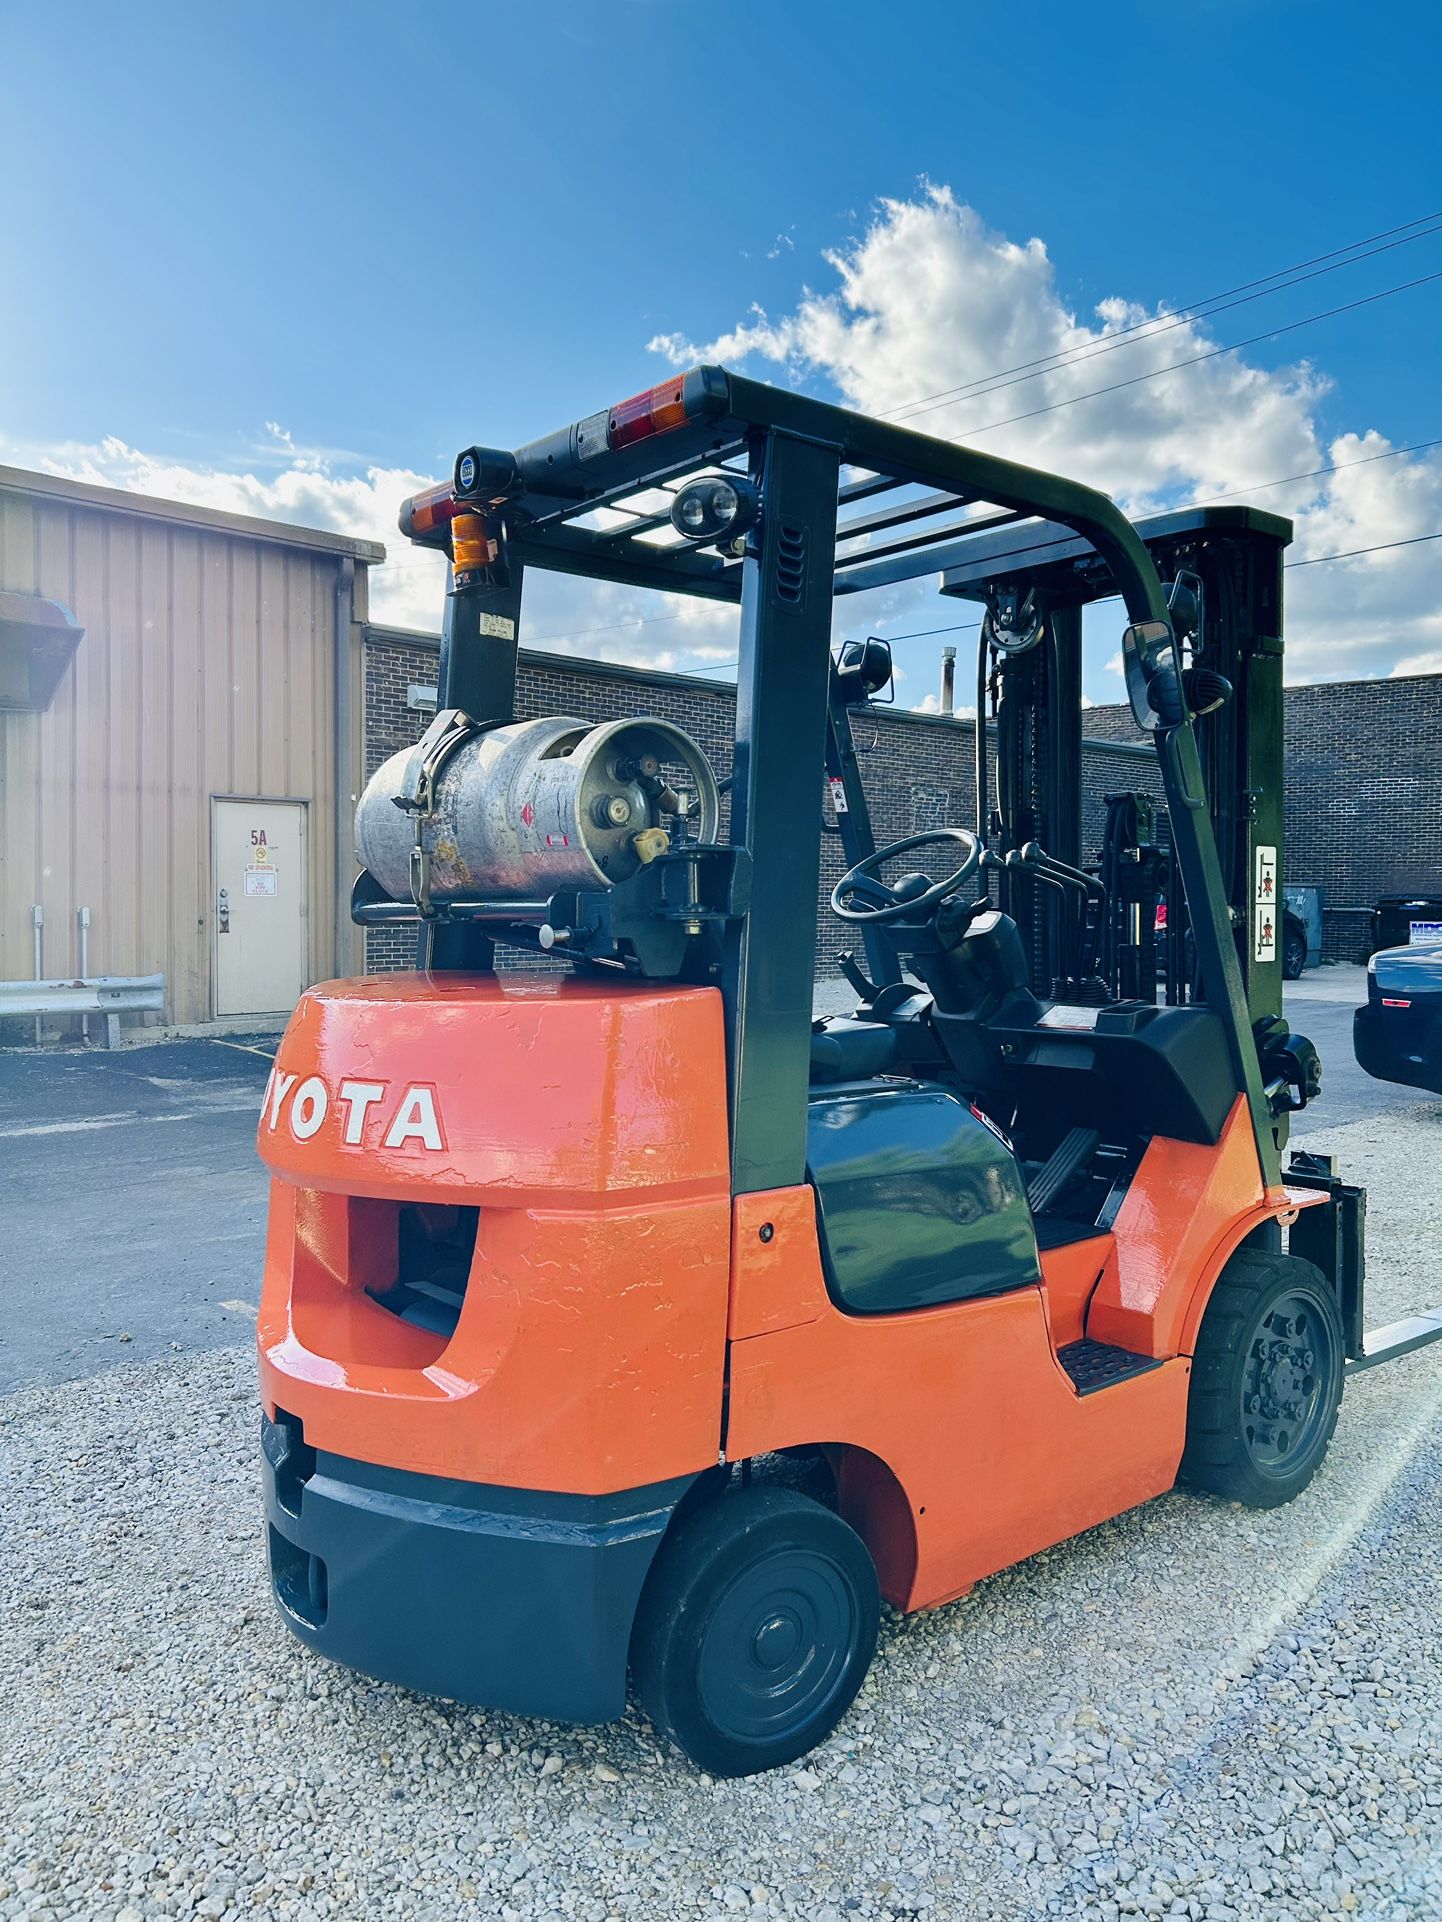 2020 Toyota 7FGCU25 Forklift. Capacity 5000 Lb. Triple Mast. Side Shift. Propane. No Issue. No leaks! Only 7k Hours. Super Clean.